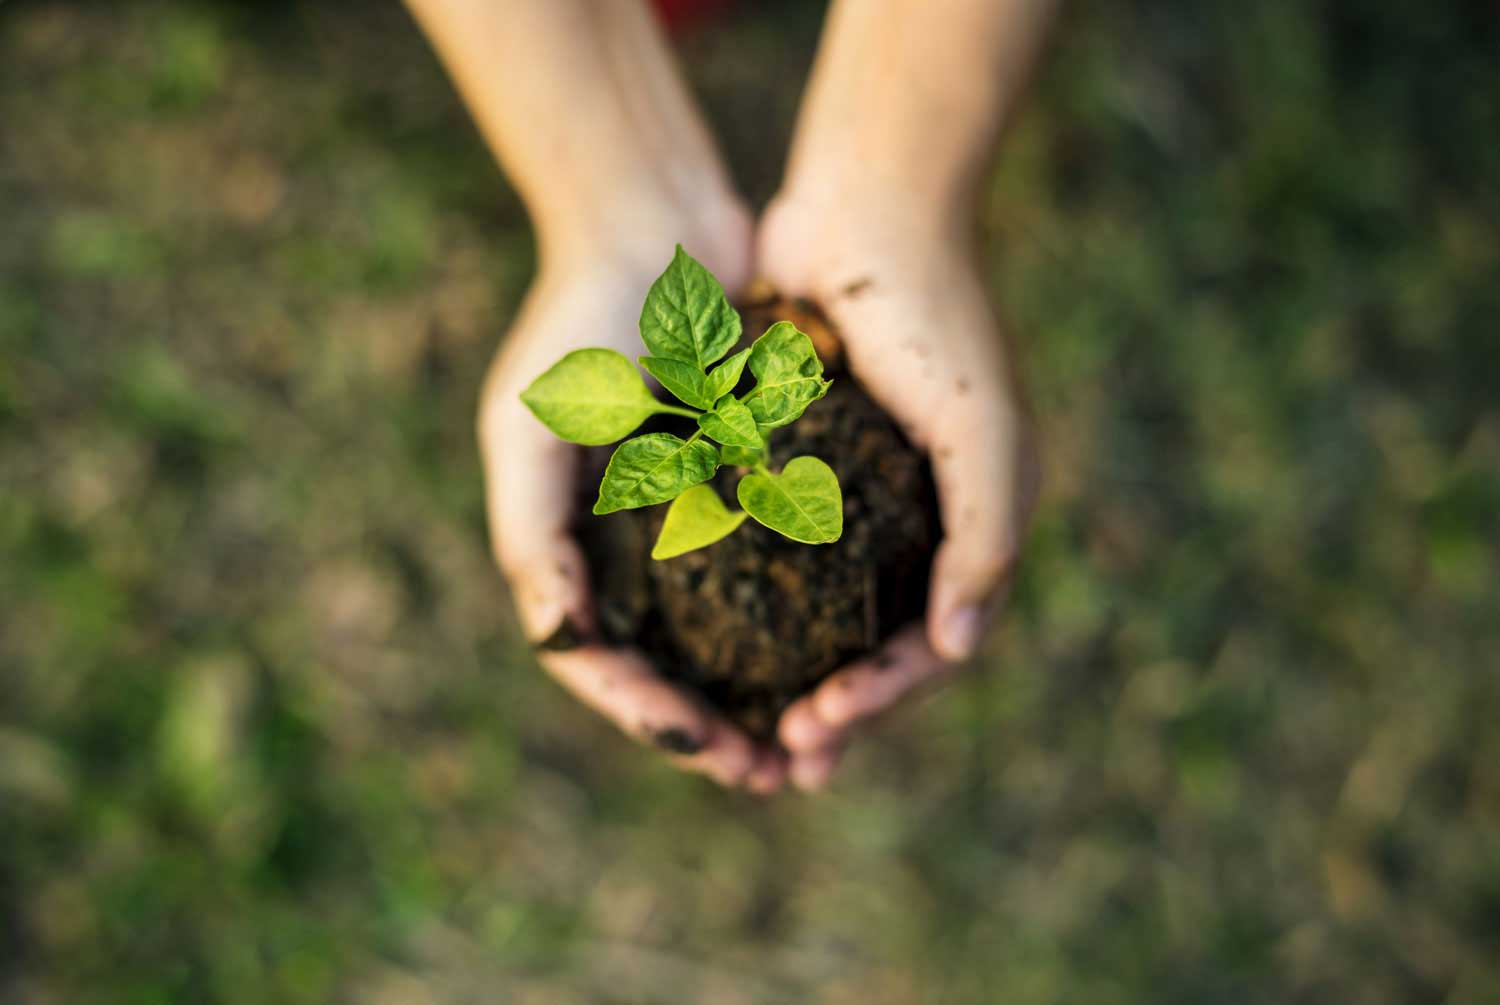 A sprout in soil being held by two hands.